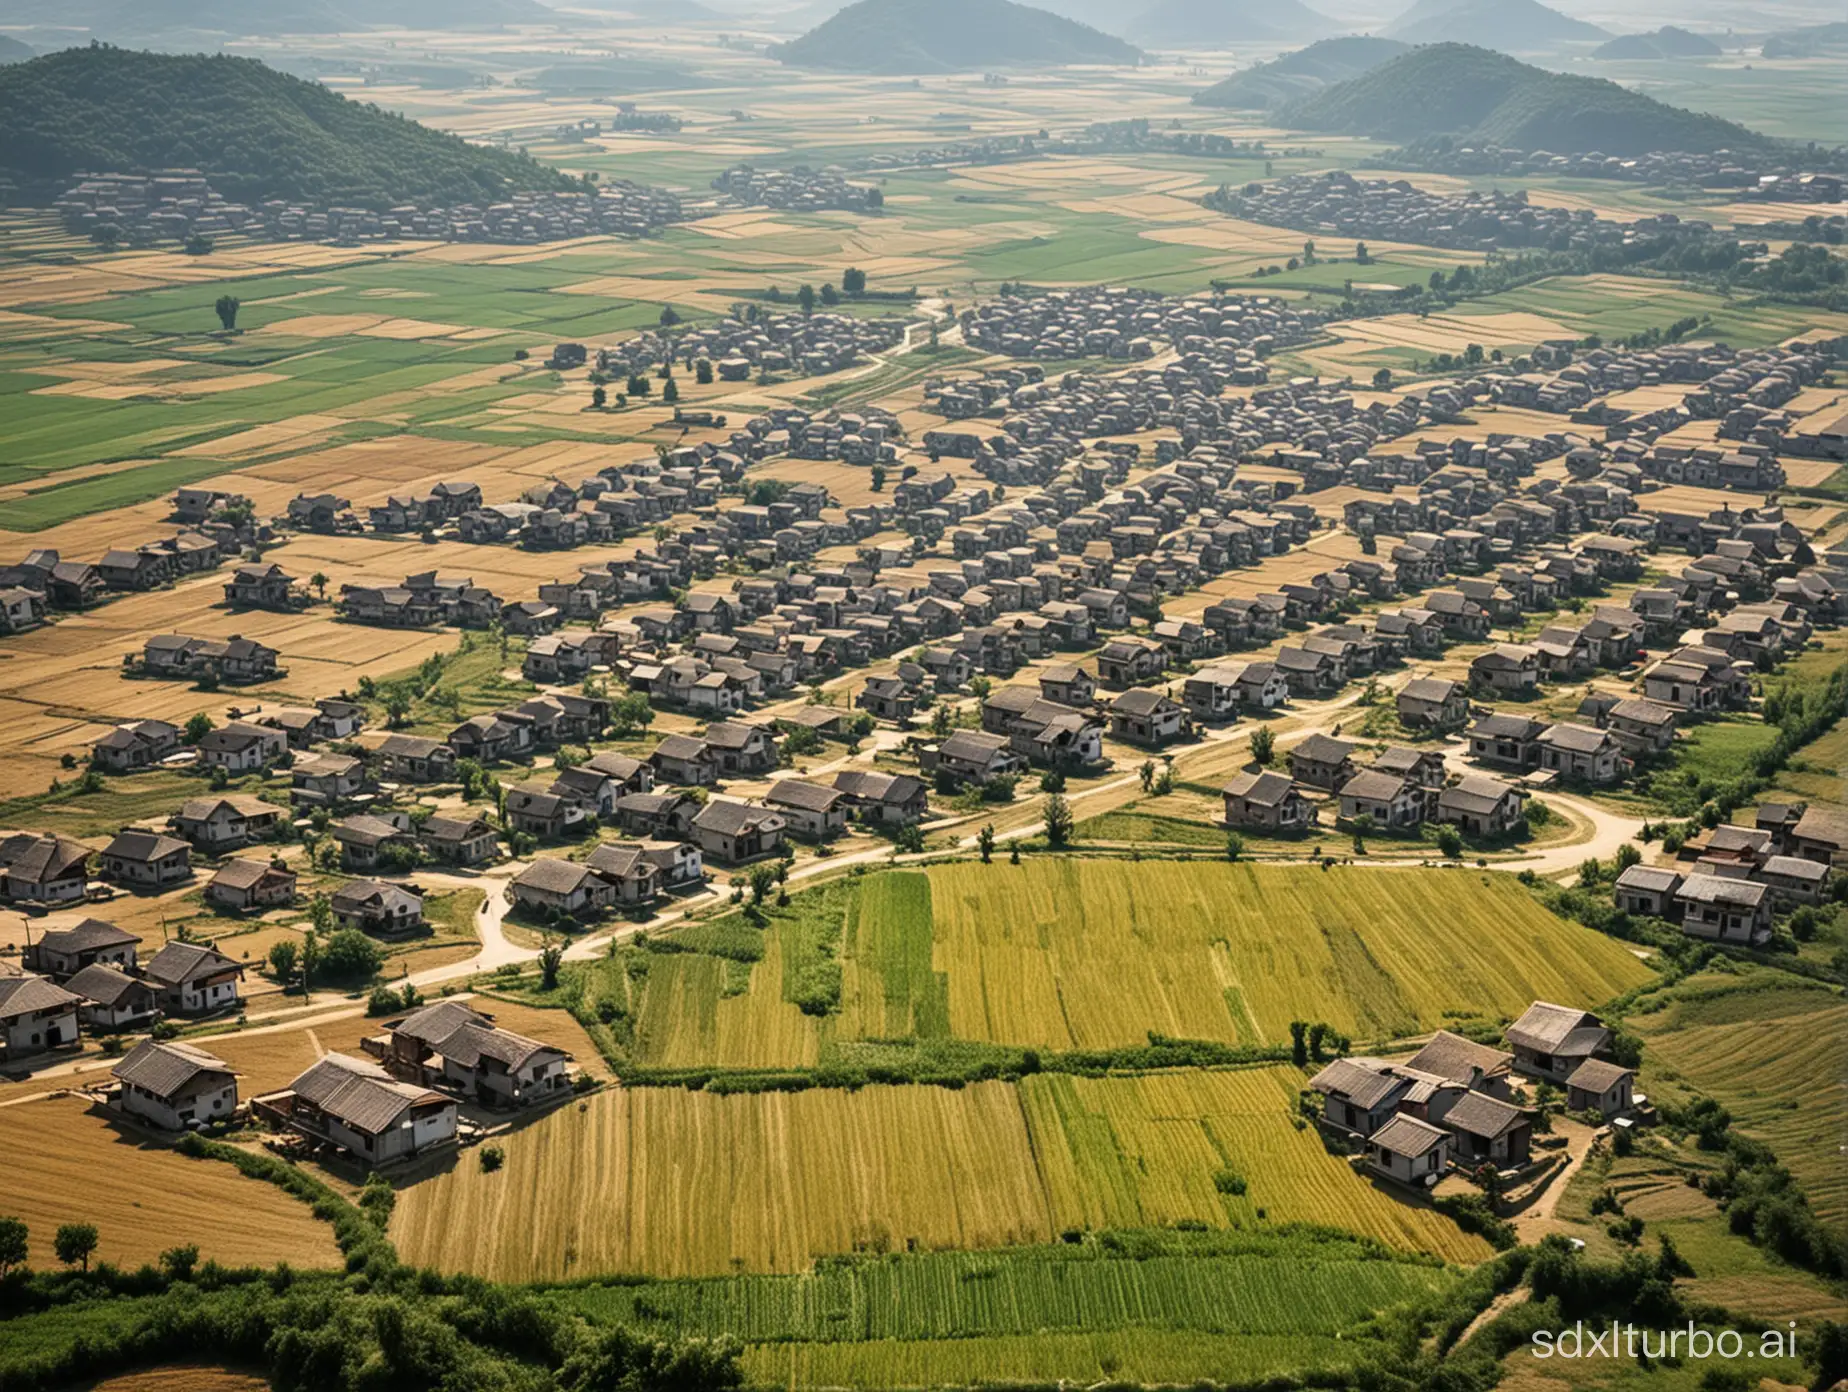 Scenic-Rural-China-Landscape-with-Traditional-Farmhouses-and-Fields